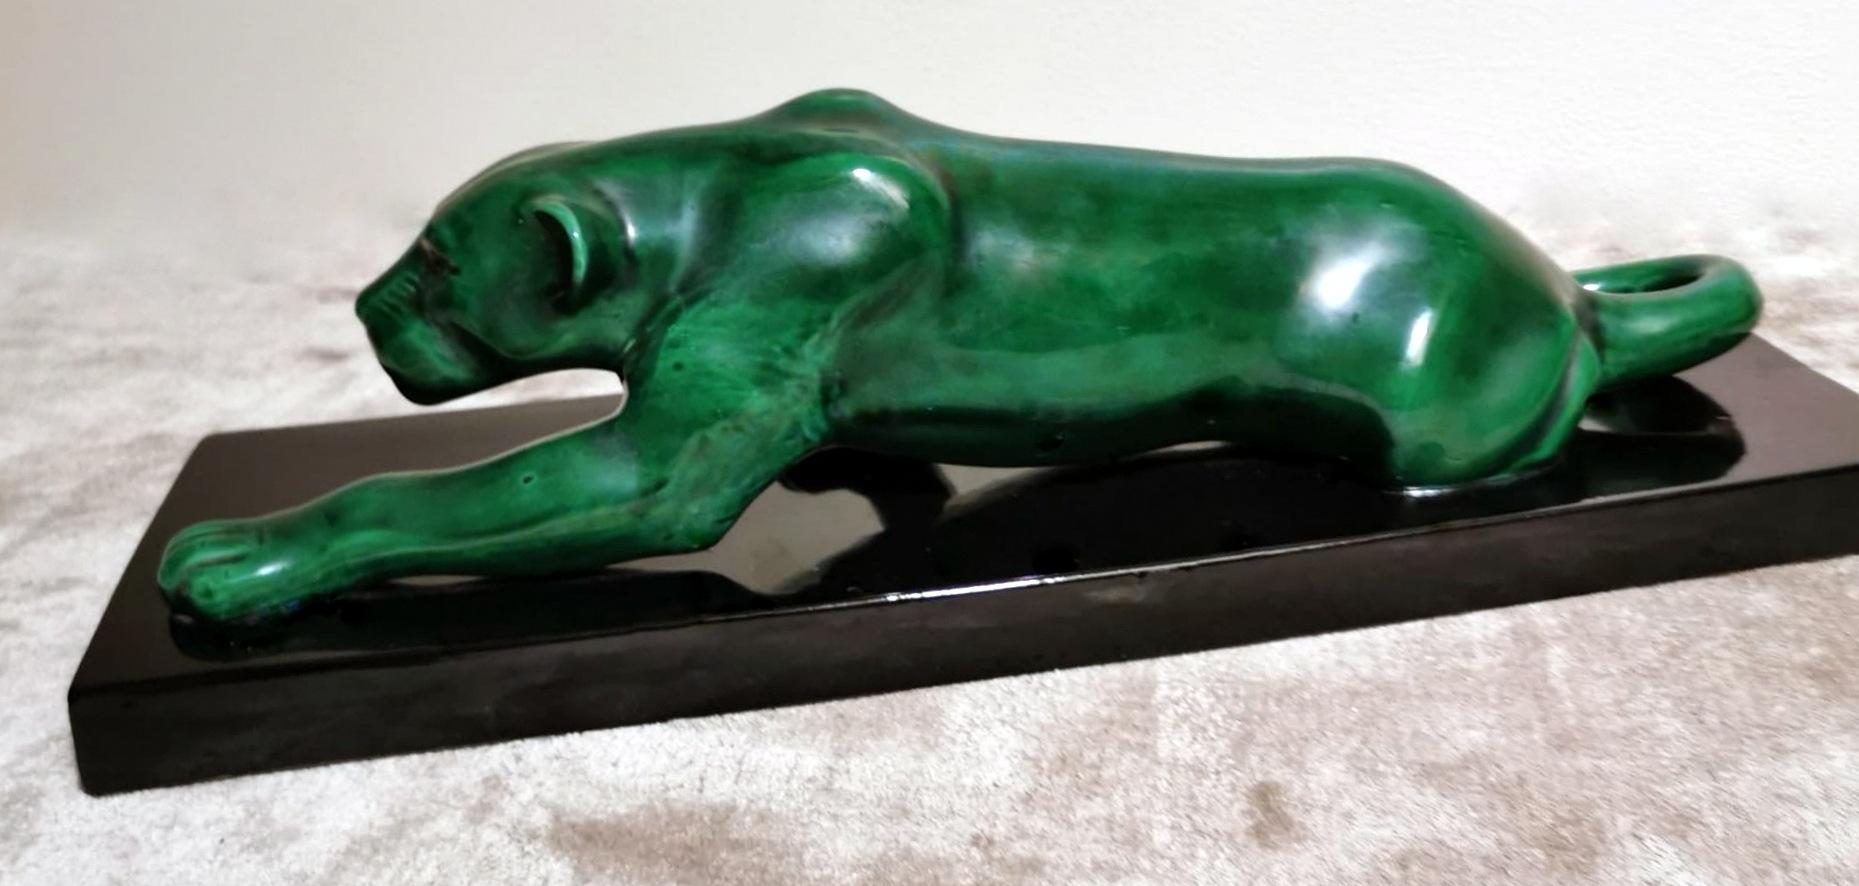 We kindly suggest you read the whole description, because with it we try to give you detailed technical and historical information to guarantee the authenticity of our objects.
Spectacular and large green ceramic panther glazed in Art Deco style,